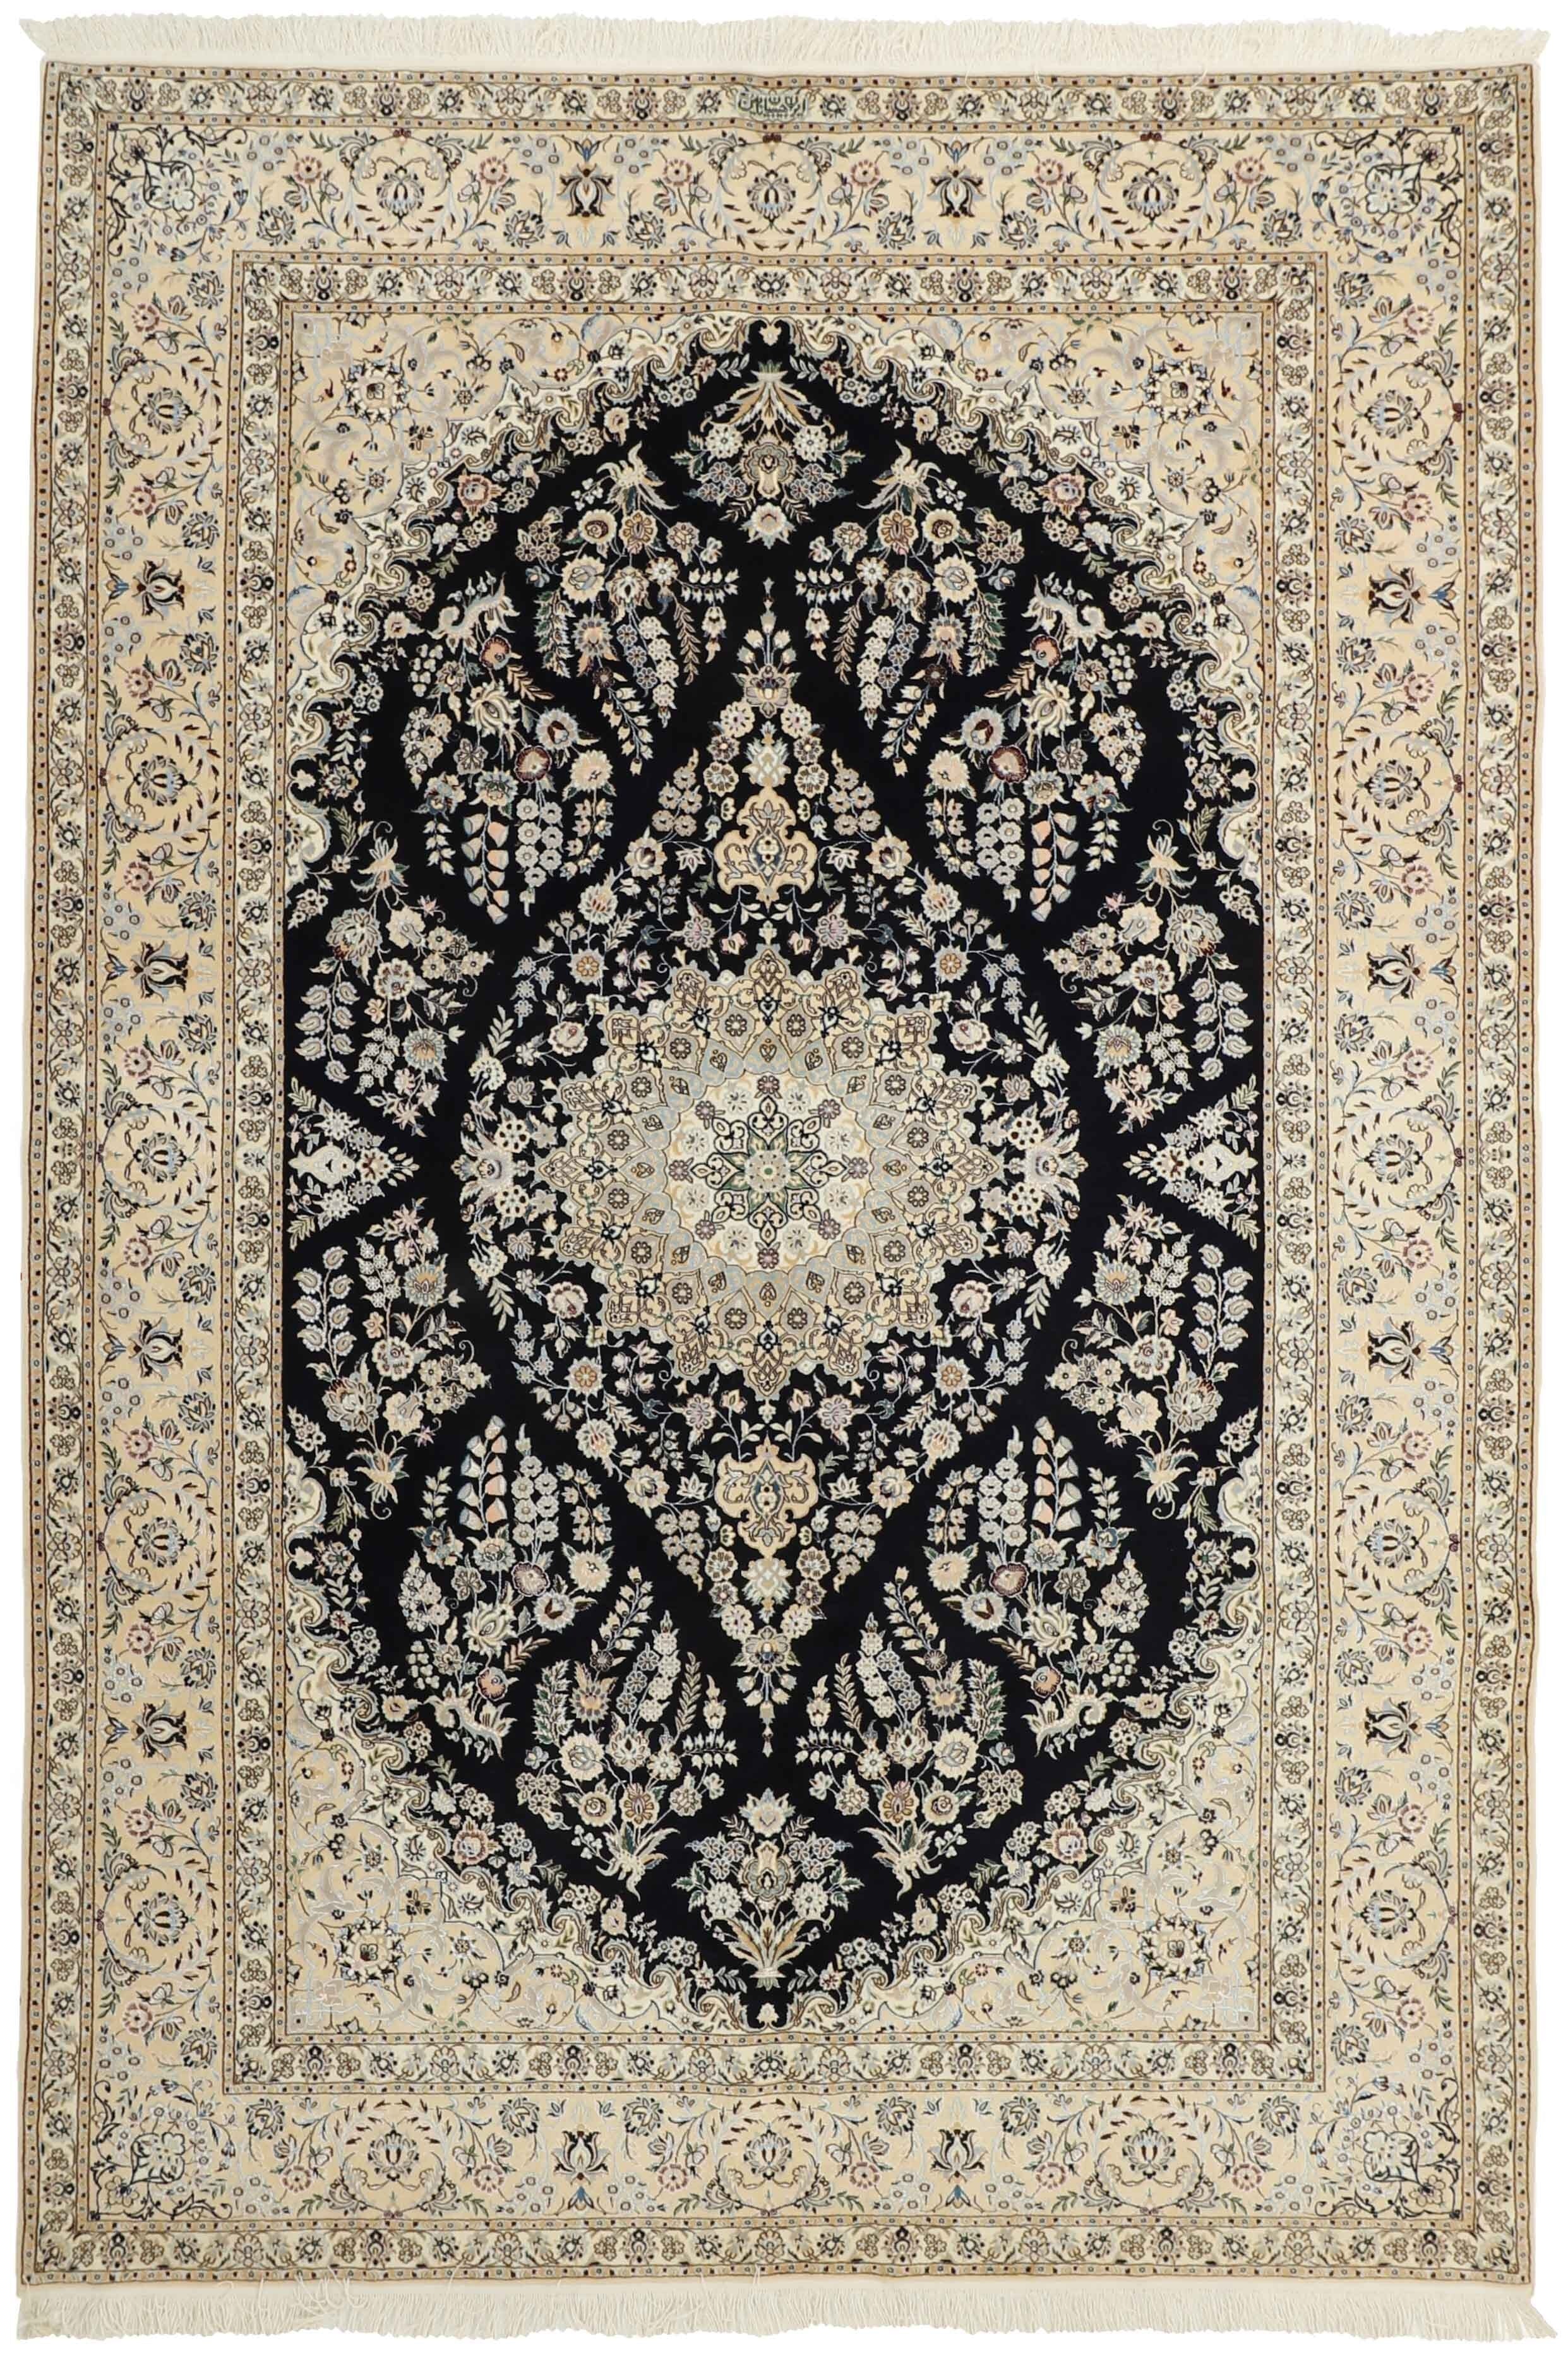 Authentic oriental rug with traditional floral design in cream, red, blue and black